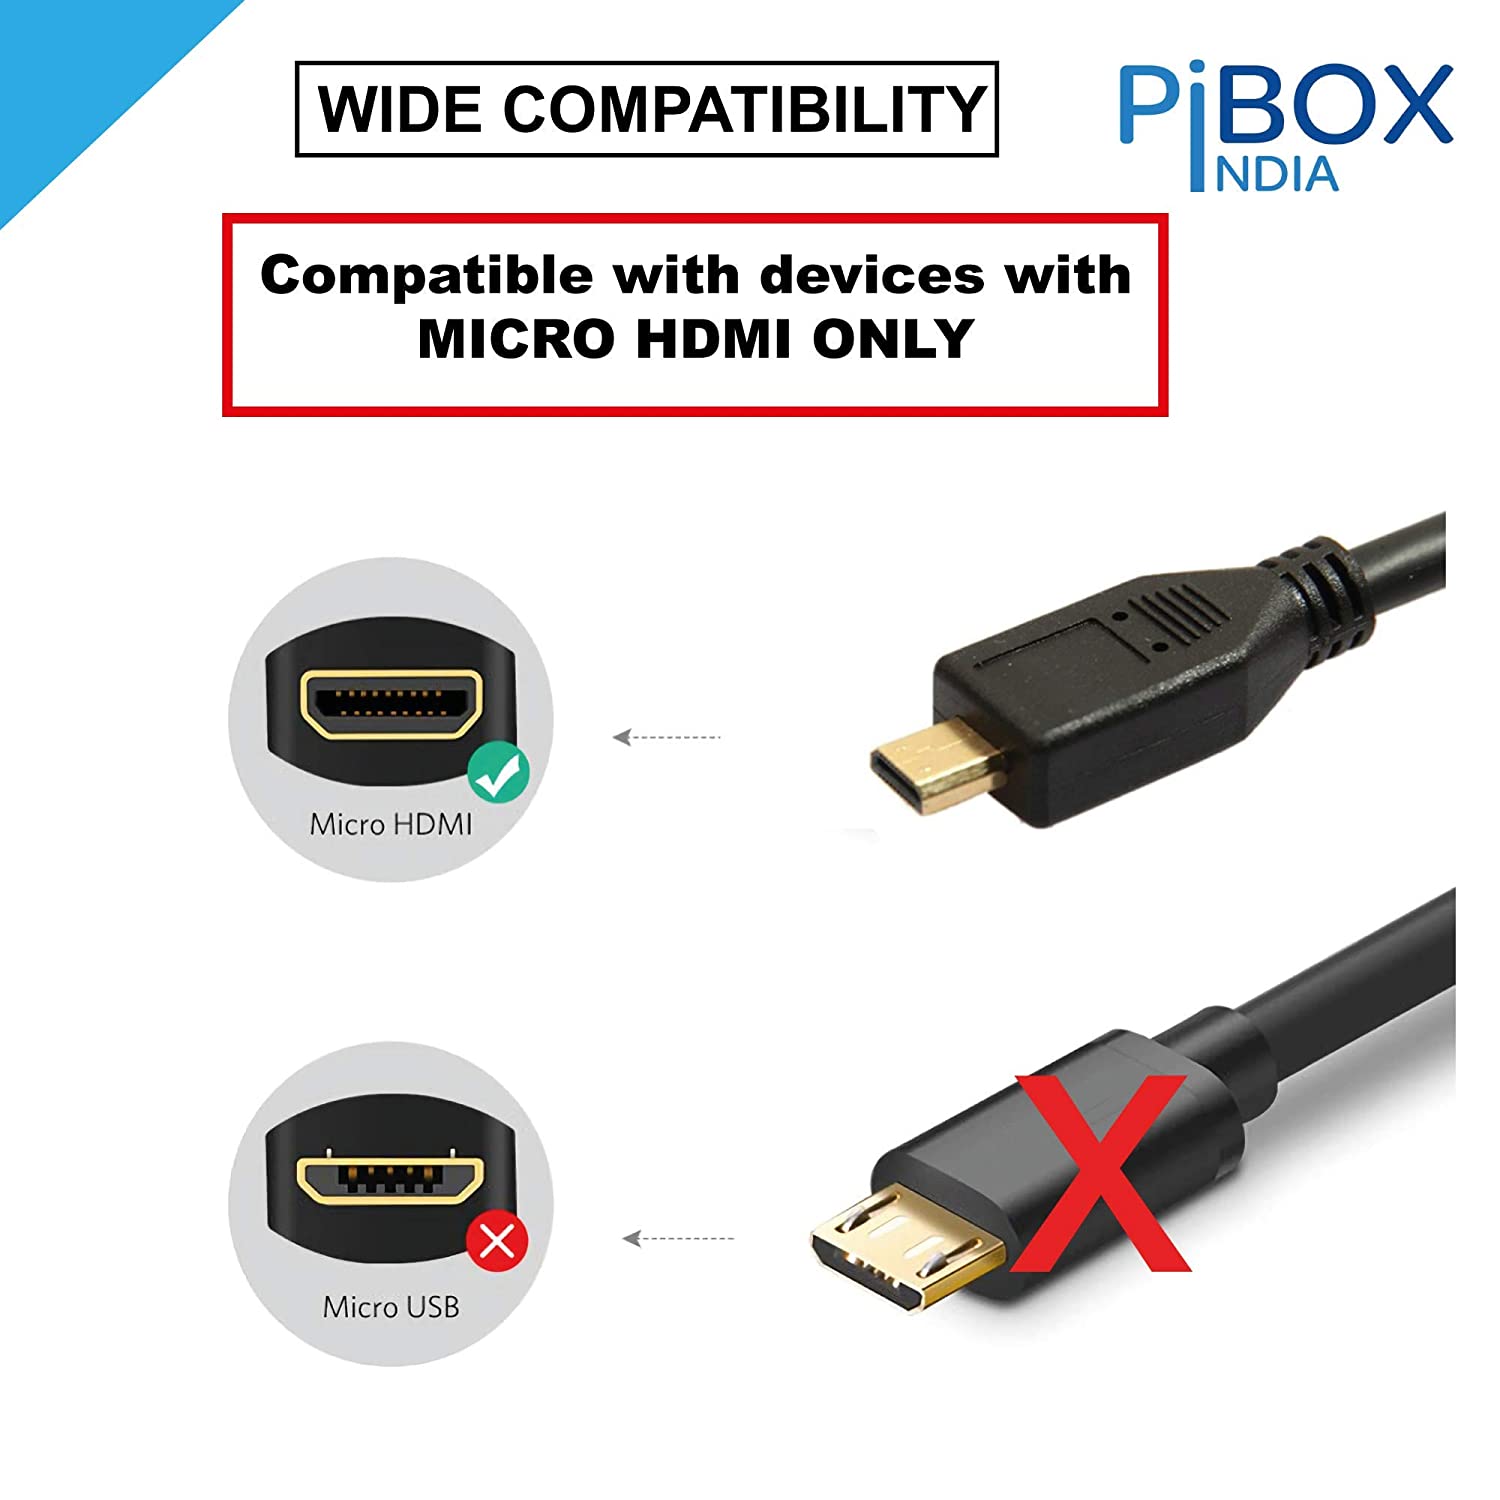 PiBOX India, Micro HDMI to HDMI Cable, 4K 60Hz, 1.5 Meter 5 feet, Adapter  Ethernet Audio Return Compatible for Raspberry Pi 4 RPI, Raspberry Pi 400,  GoPro Hero 7, Sony A6000 A6300